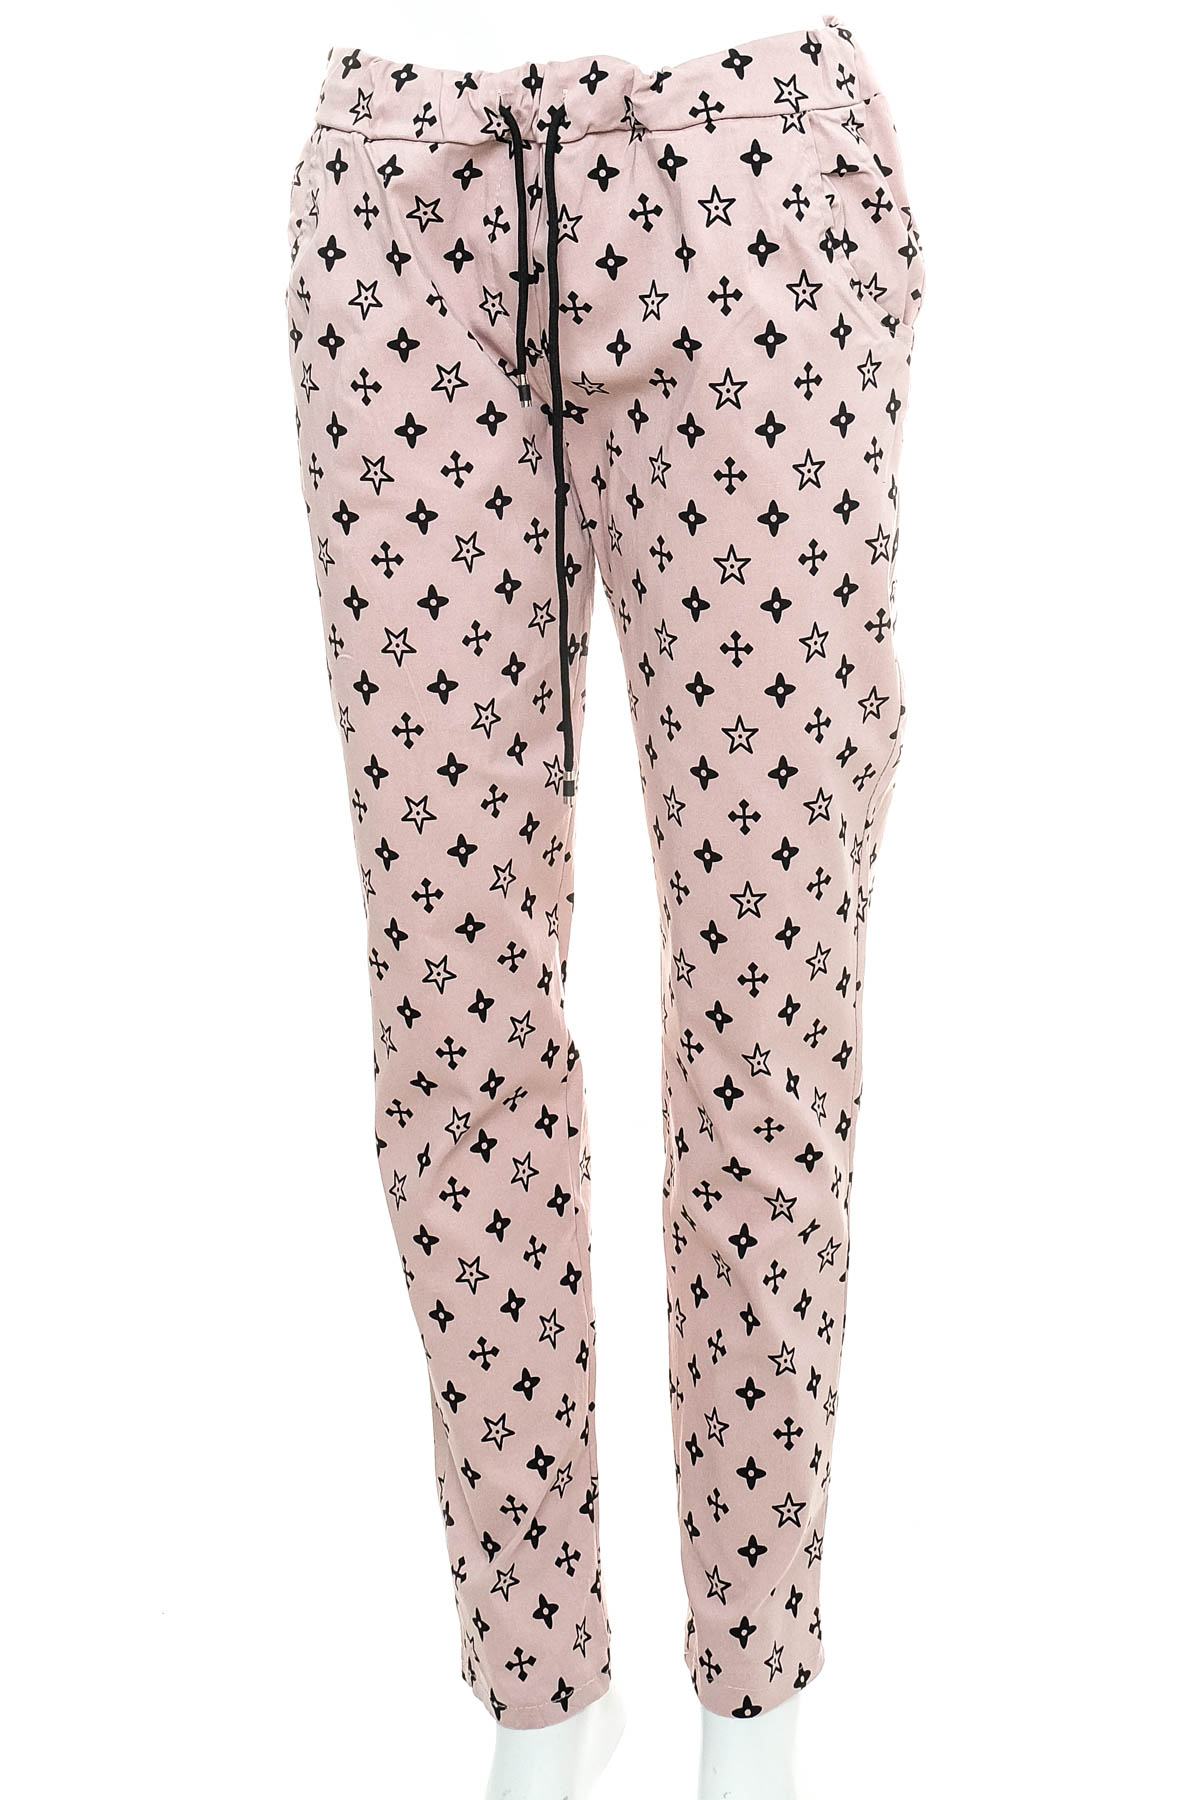 Women's trousers - New Collection - 0